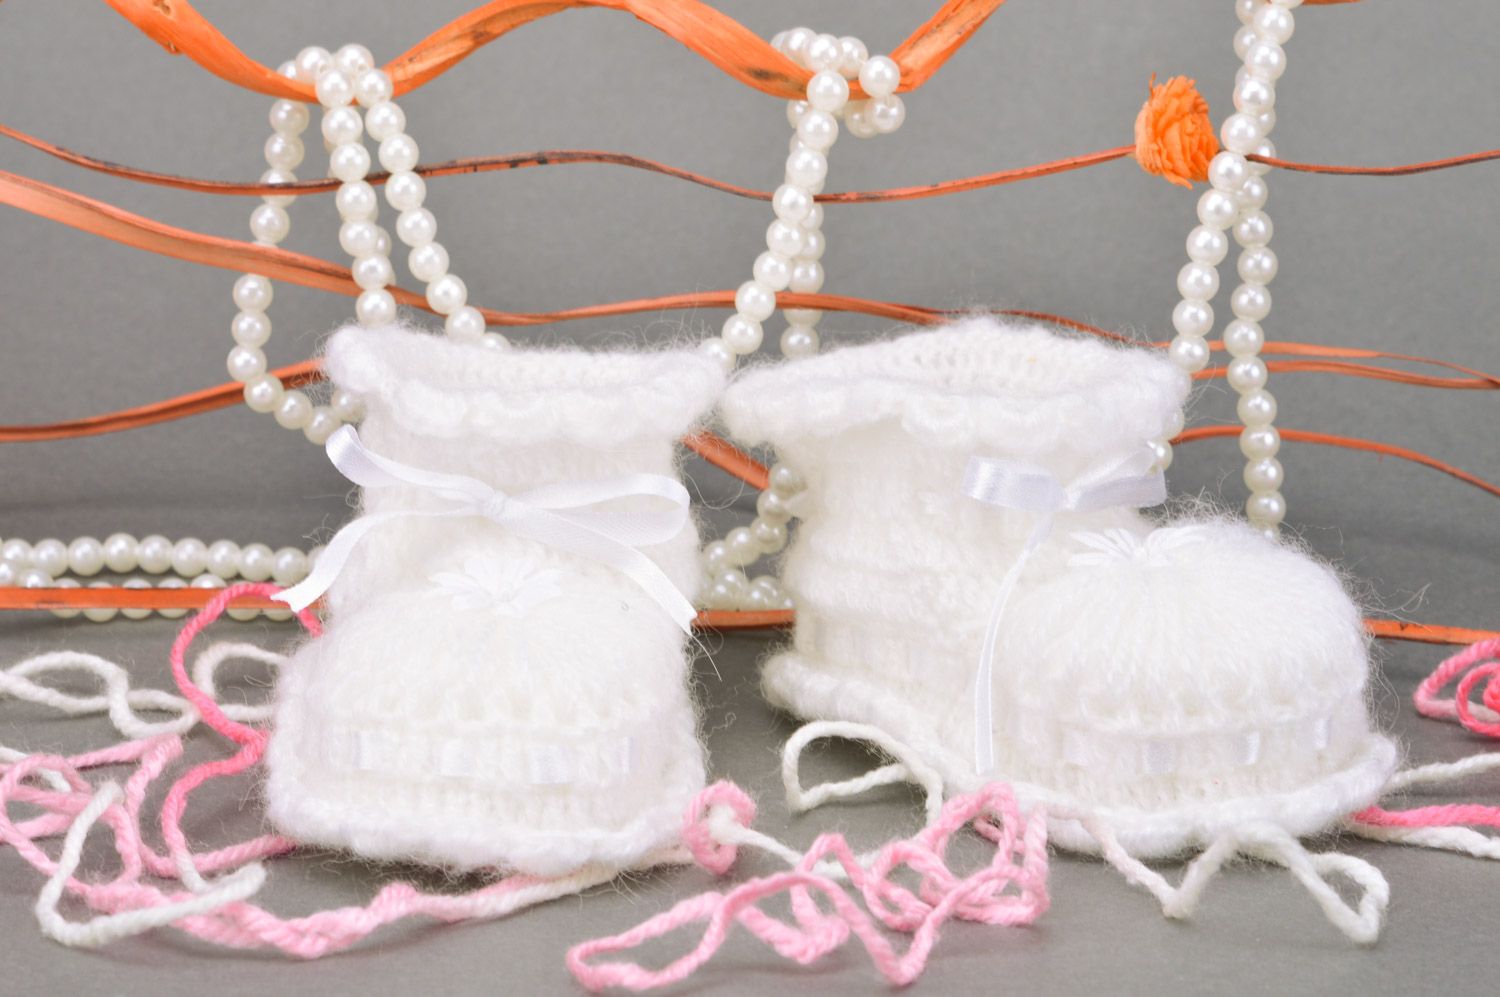 Handmade crocheted white baby booties for girl made of acrylic yarn with ribbon photo 1